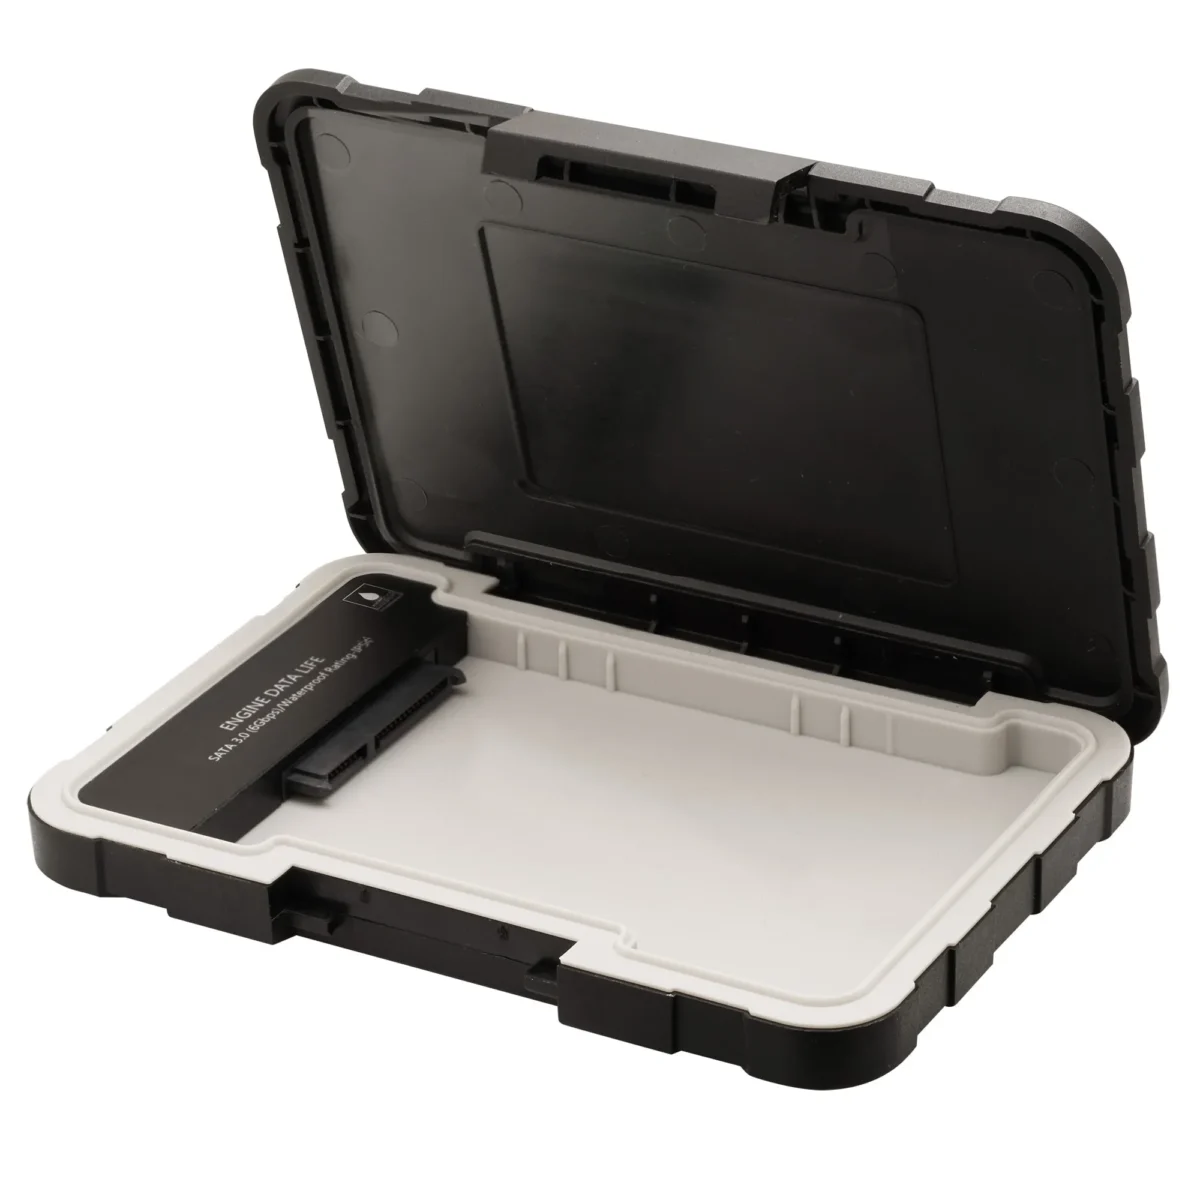 ADATA-ED600-External-Enclosure-Case-cover-for-SSD-HDD-Drive-in-Dubai-Abu-dhabi-sharjah-fast -Delivery-1